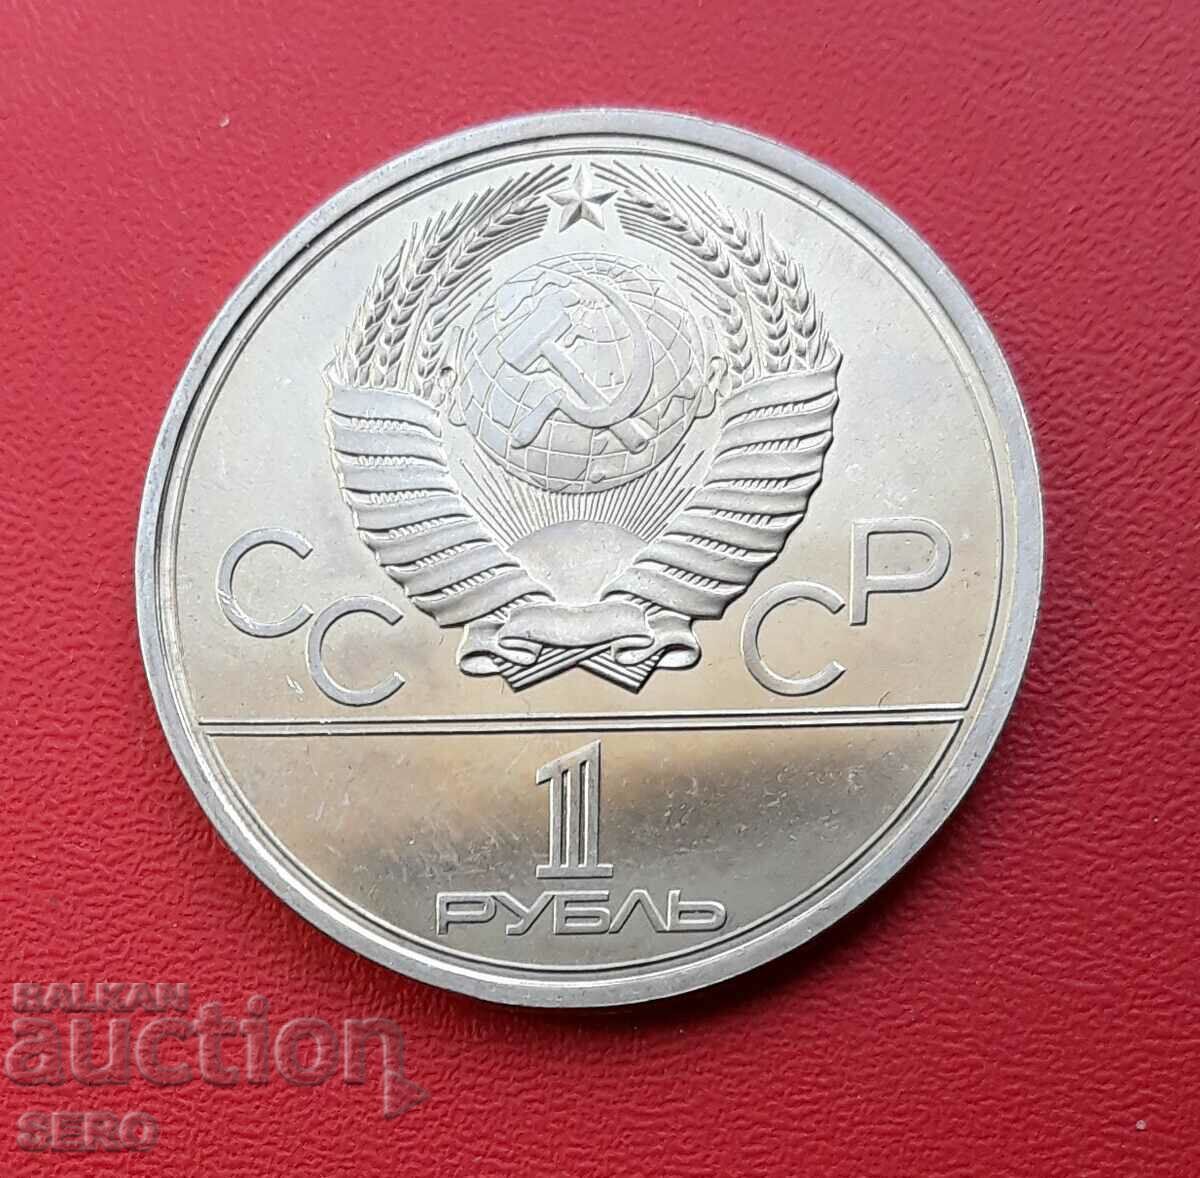 Russia-USSR-1 ruble 1980-Olympics Moscow 1980